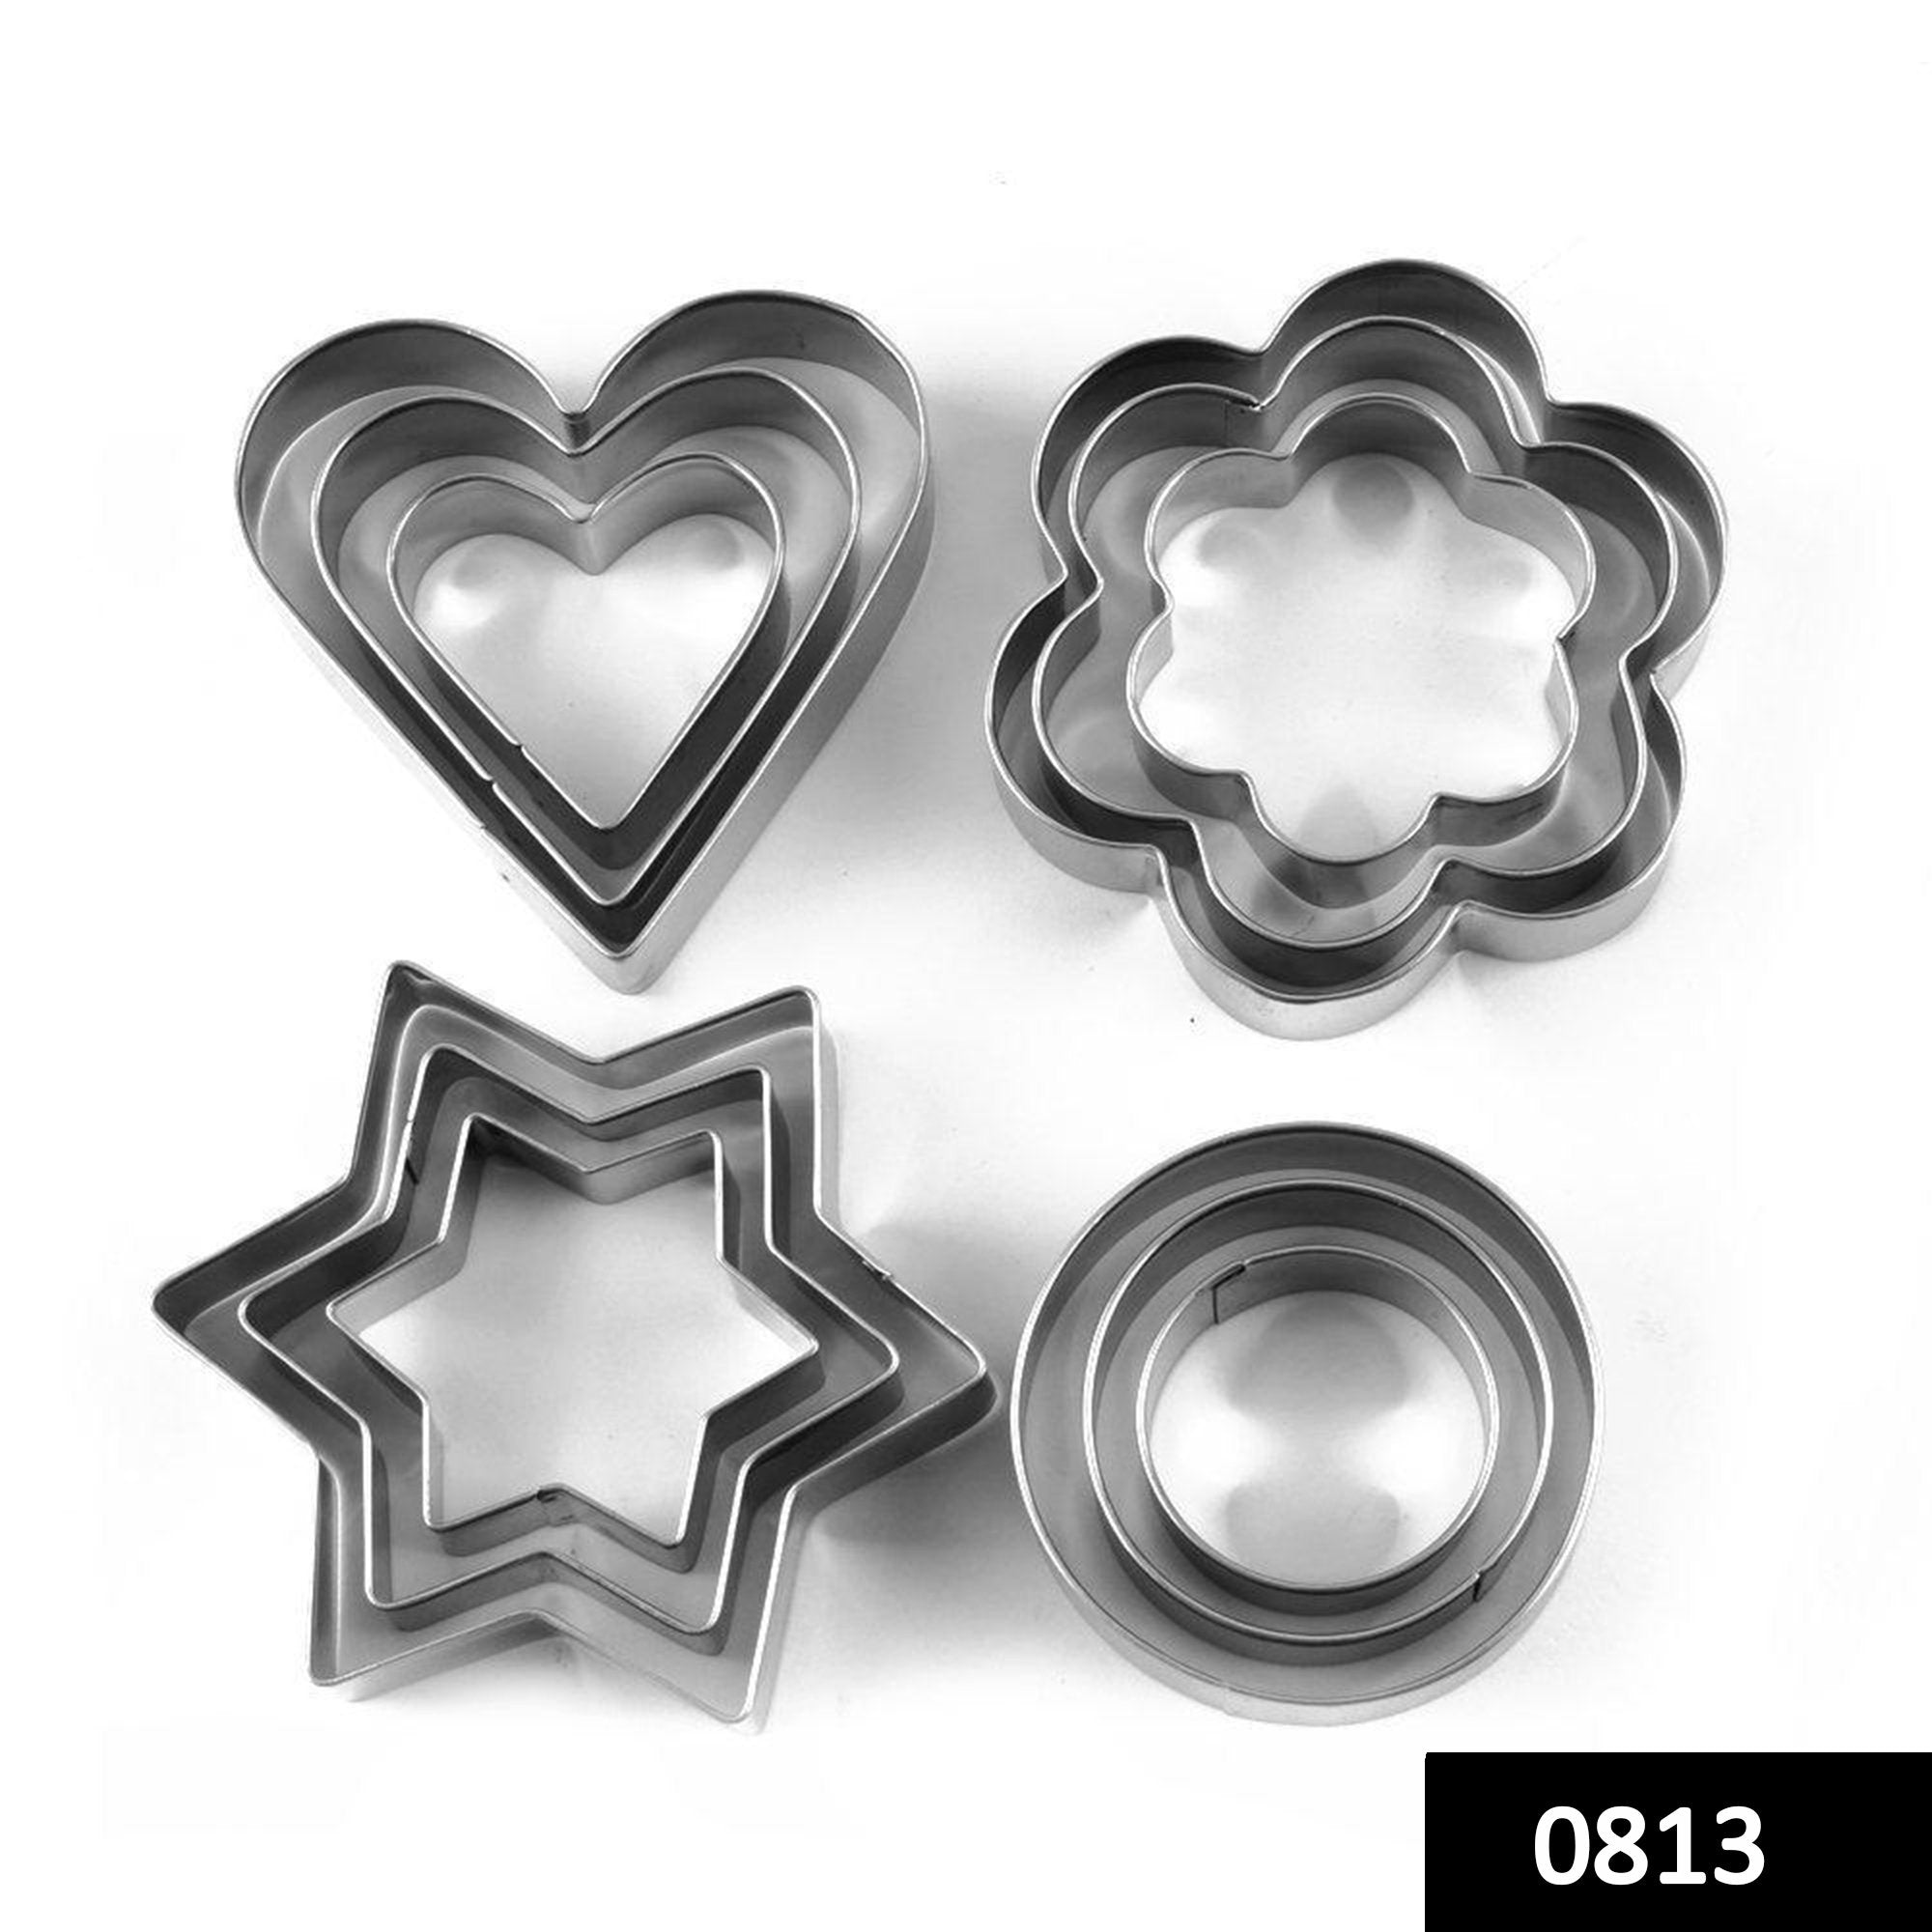 0813 Cookie Cutter Stainless Steel Cookie Cutter with Shape Heart Round Star and Flower (12 Pieces) - SkyShopy